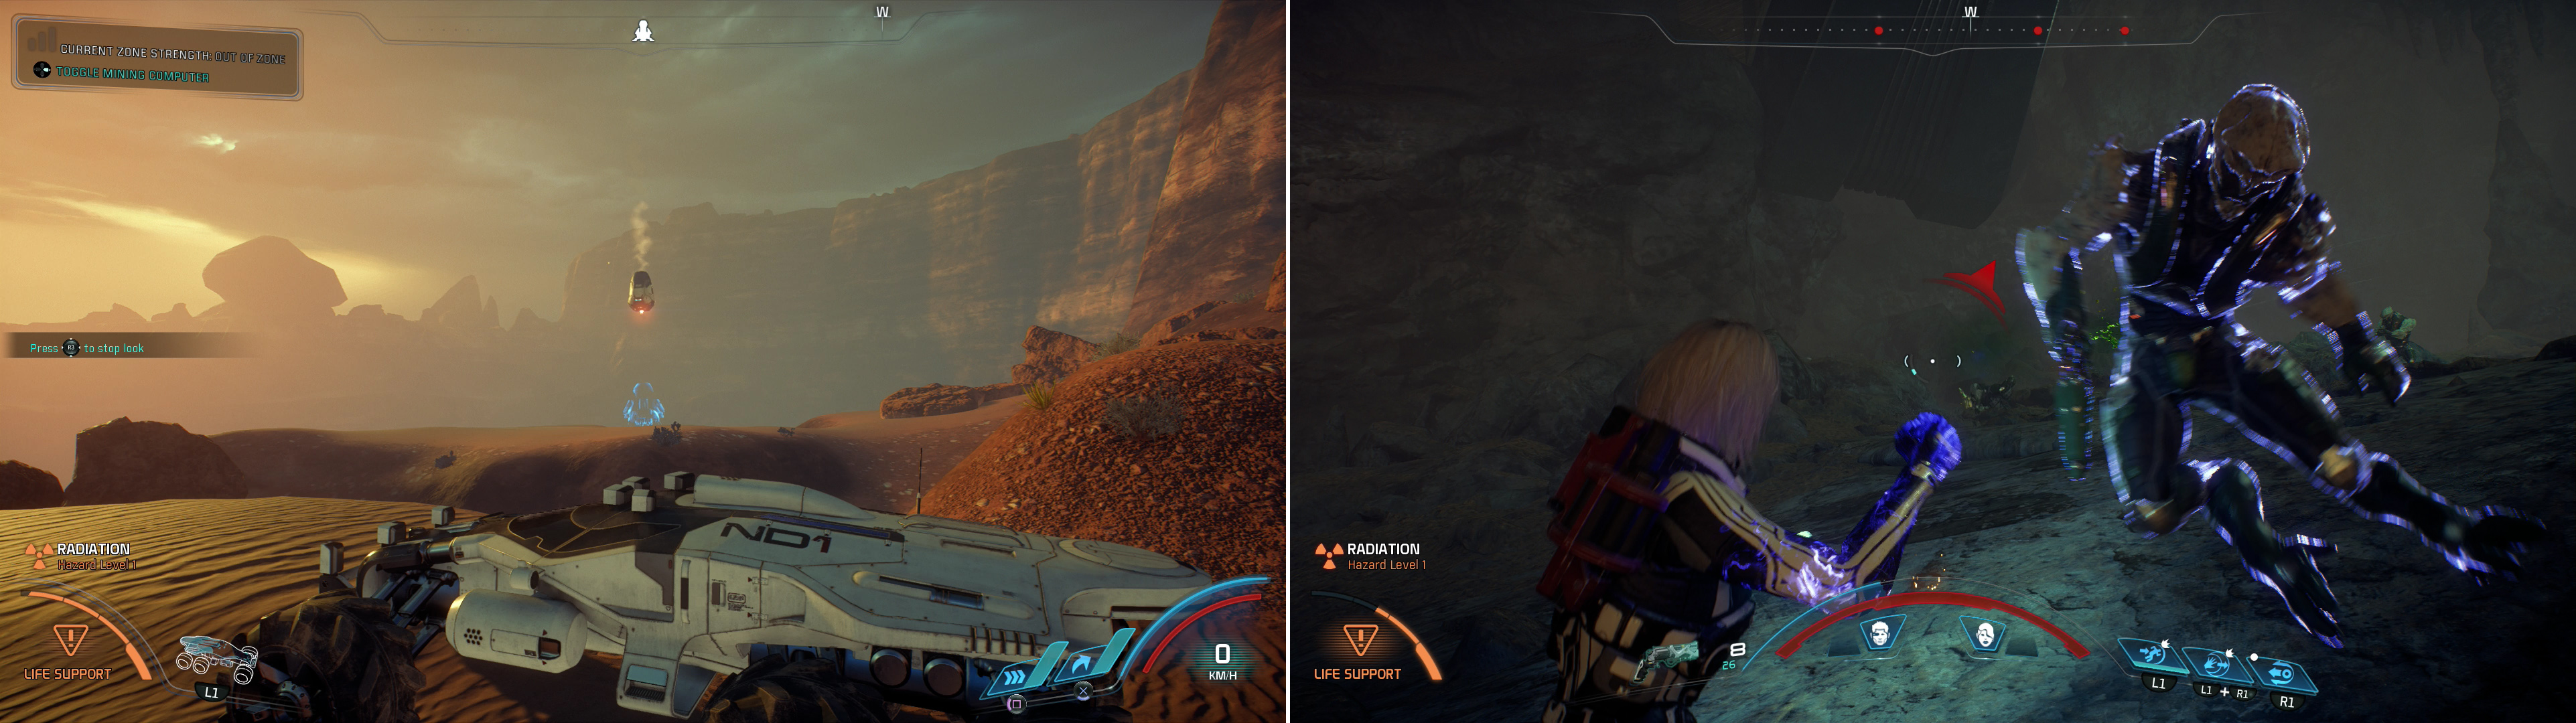 Near the second monolith youll find another Forward Station (left), near which is a cave filled with Kett (right).